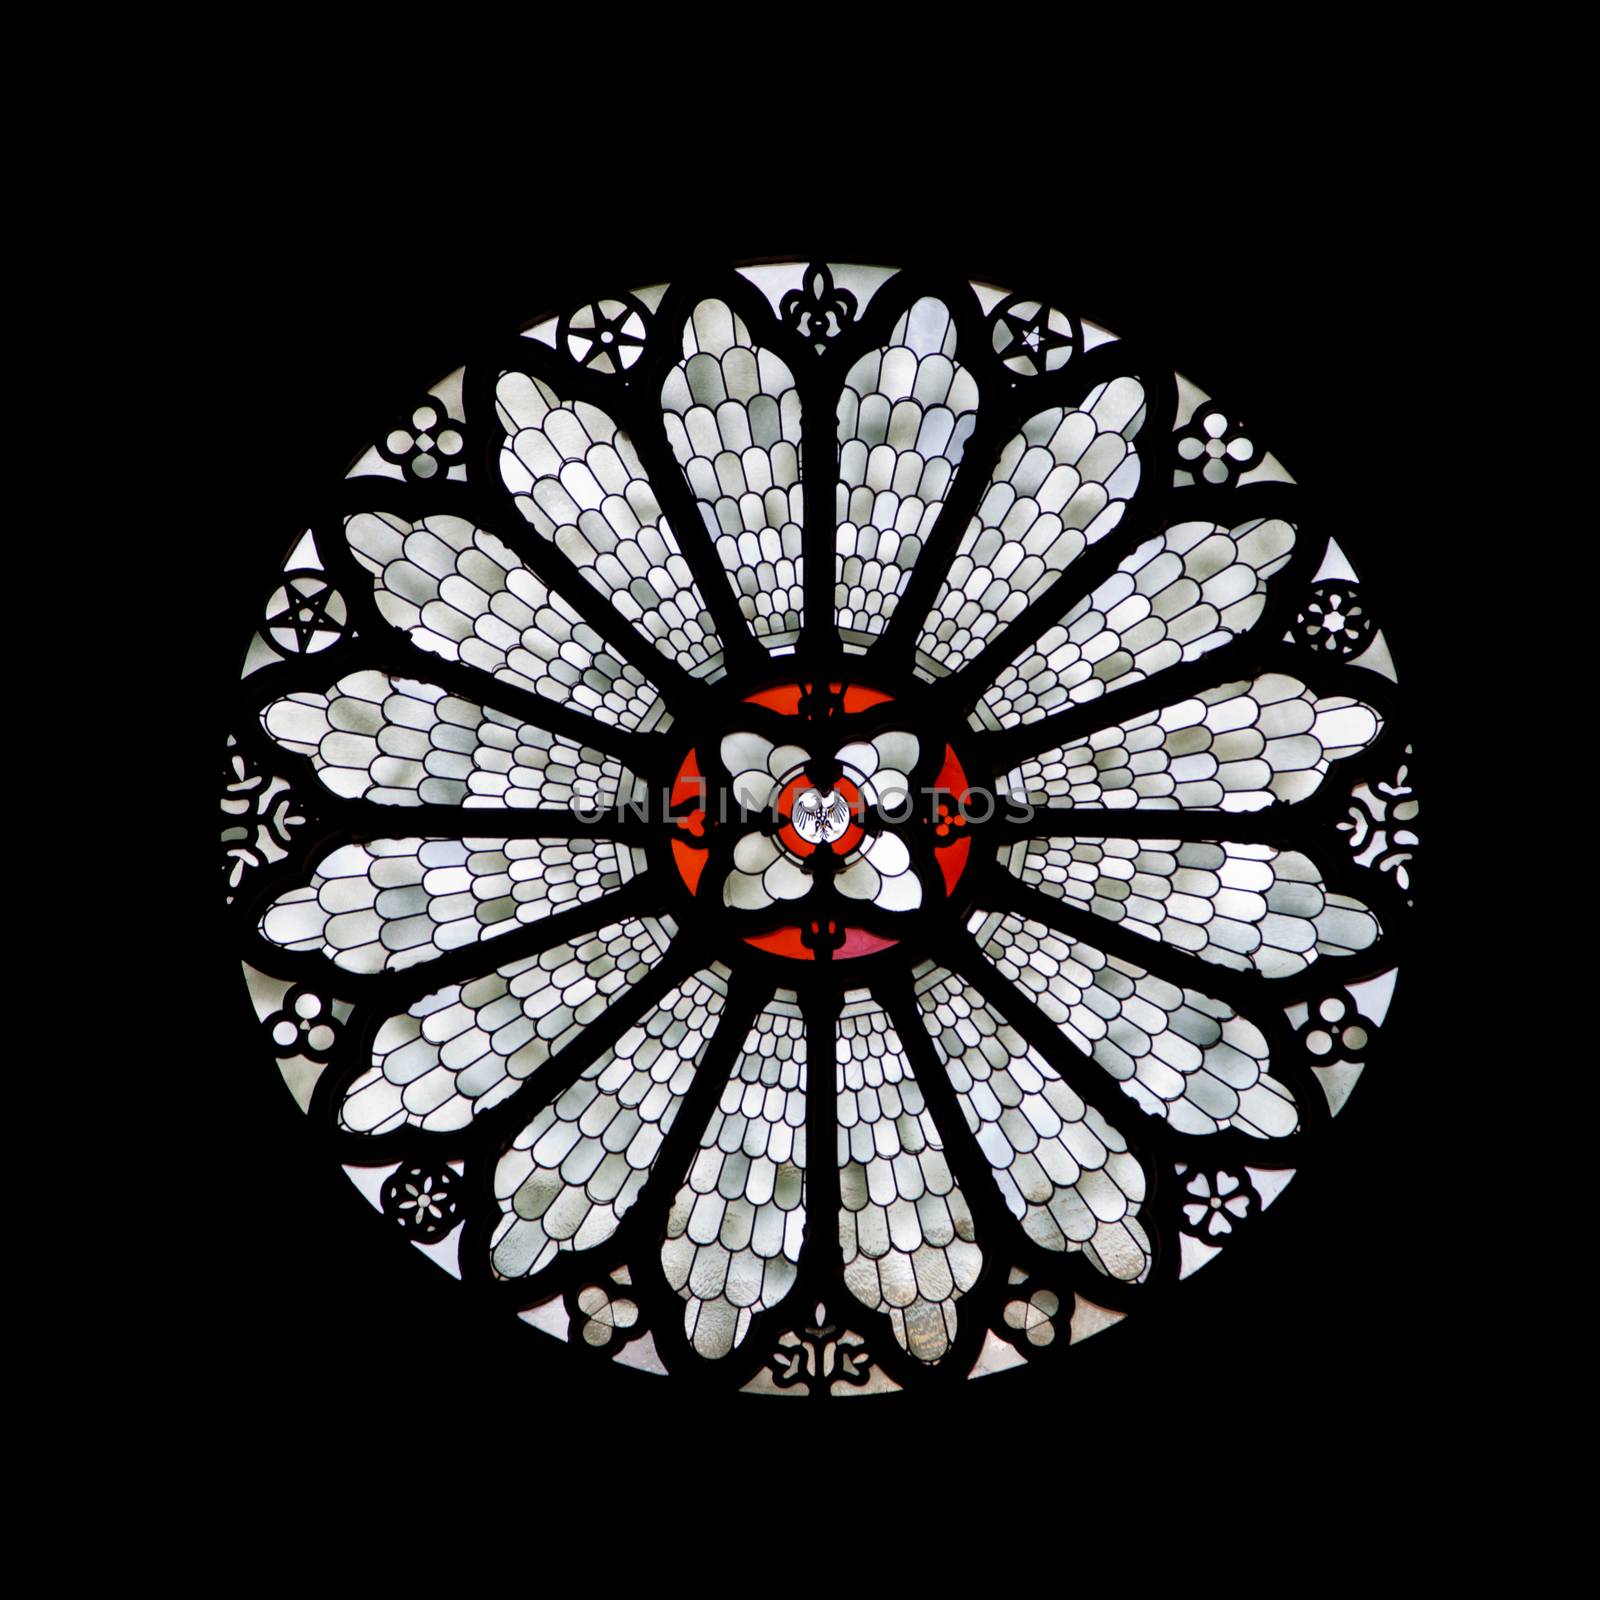 Staned-glass rose window of Trento cathedral by Goodday